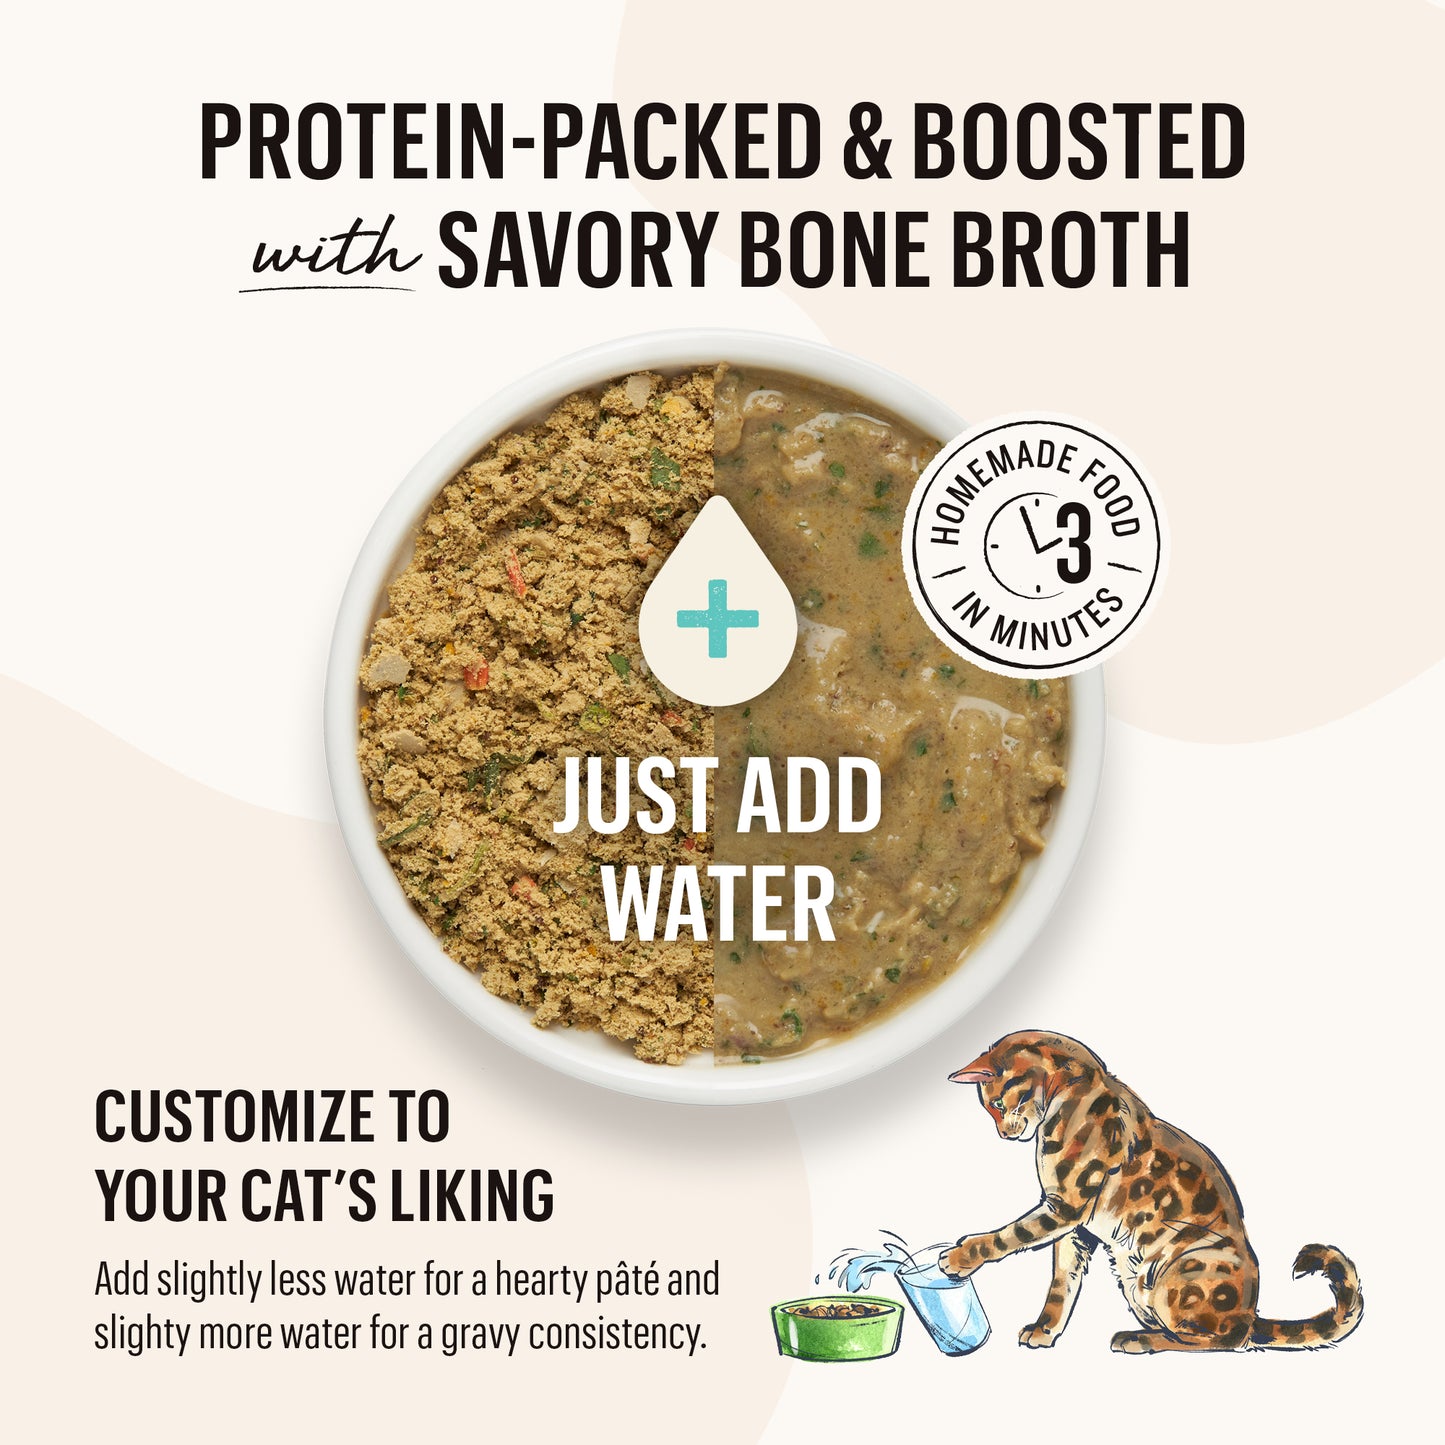 Dehydrated Grain Free Cat Food Variety Pack